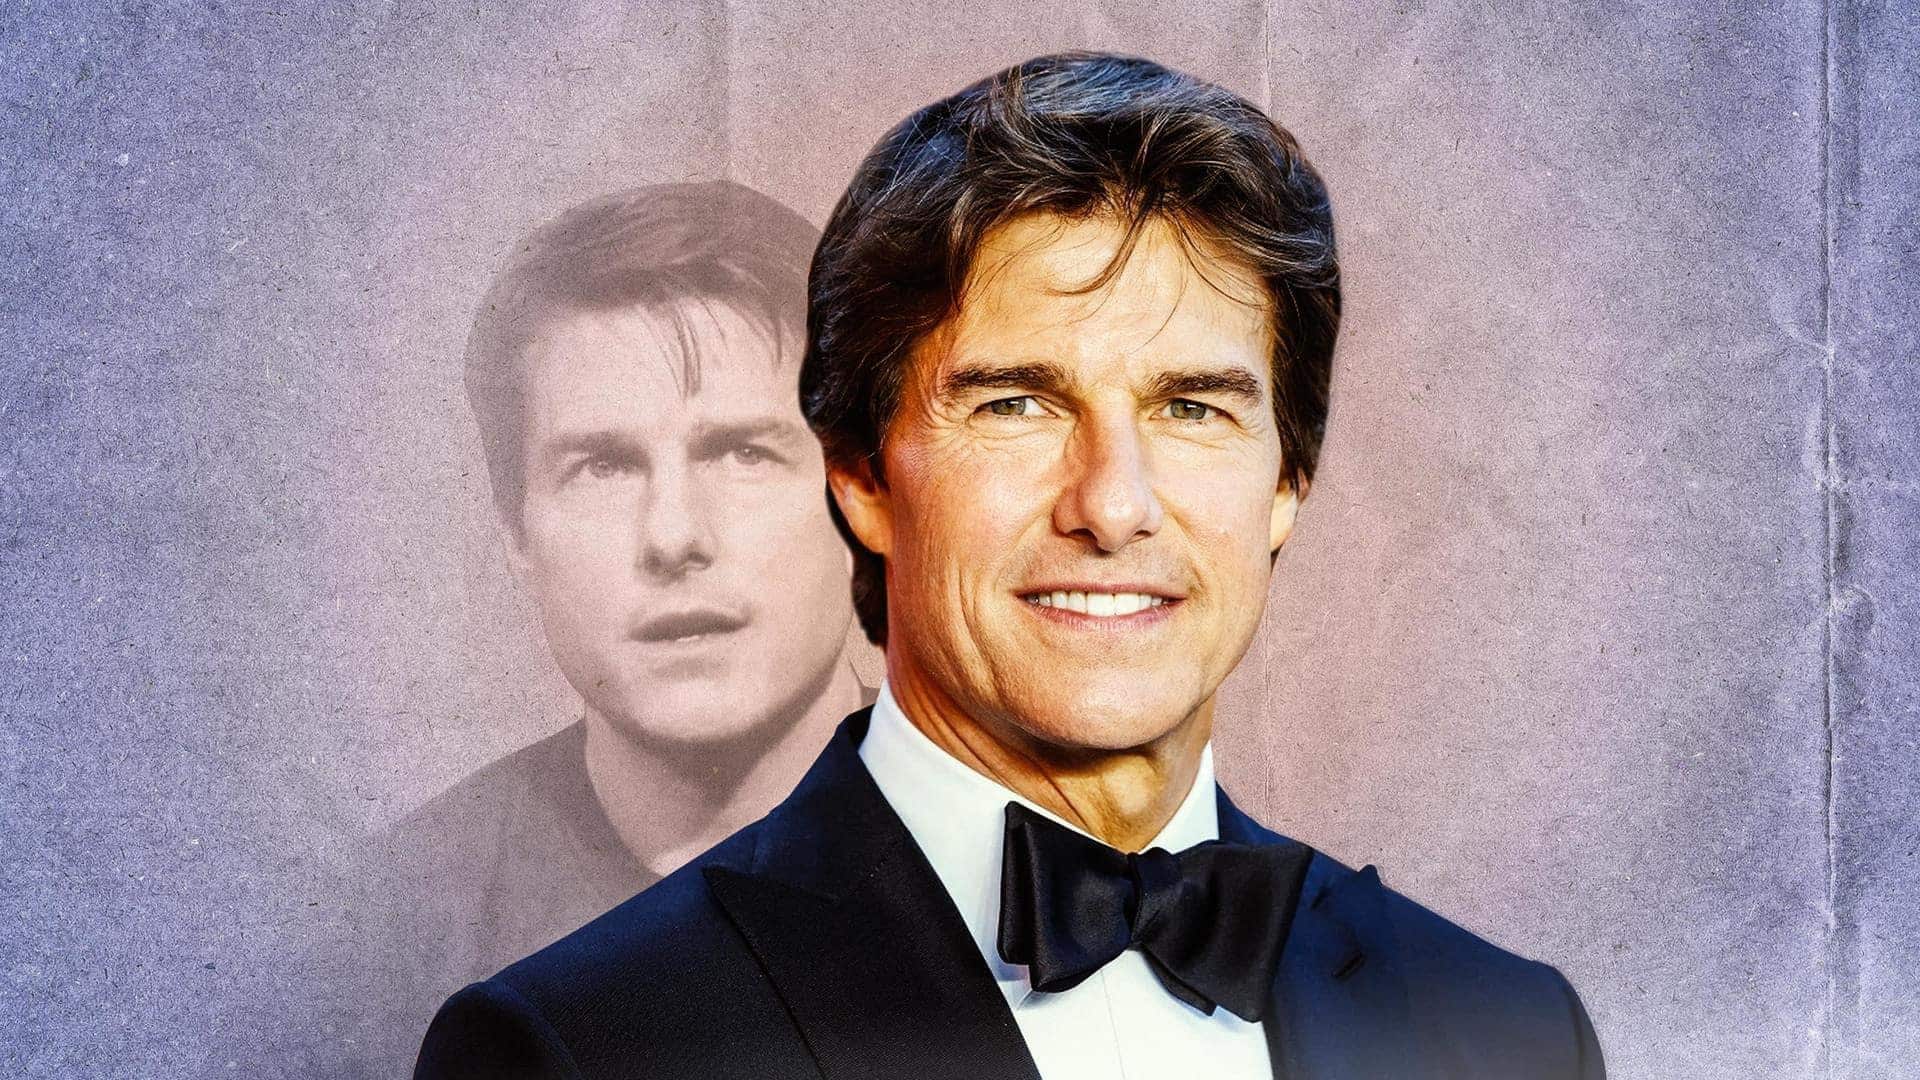 Tom Cruise inks deal to create films with Warner Bros.